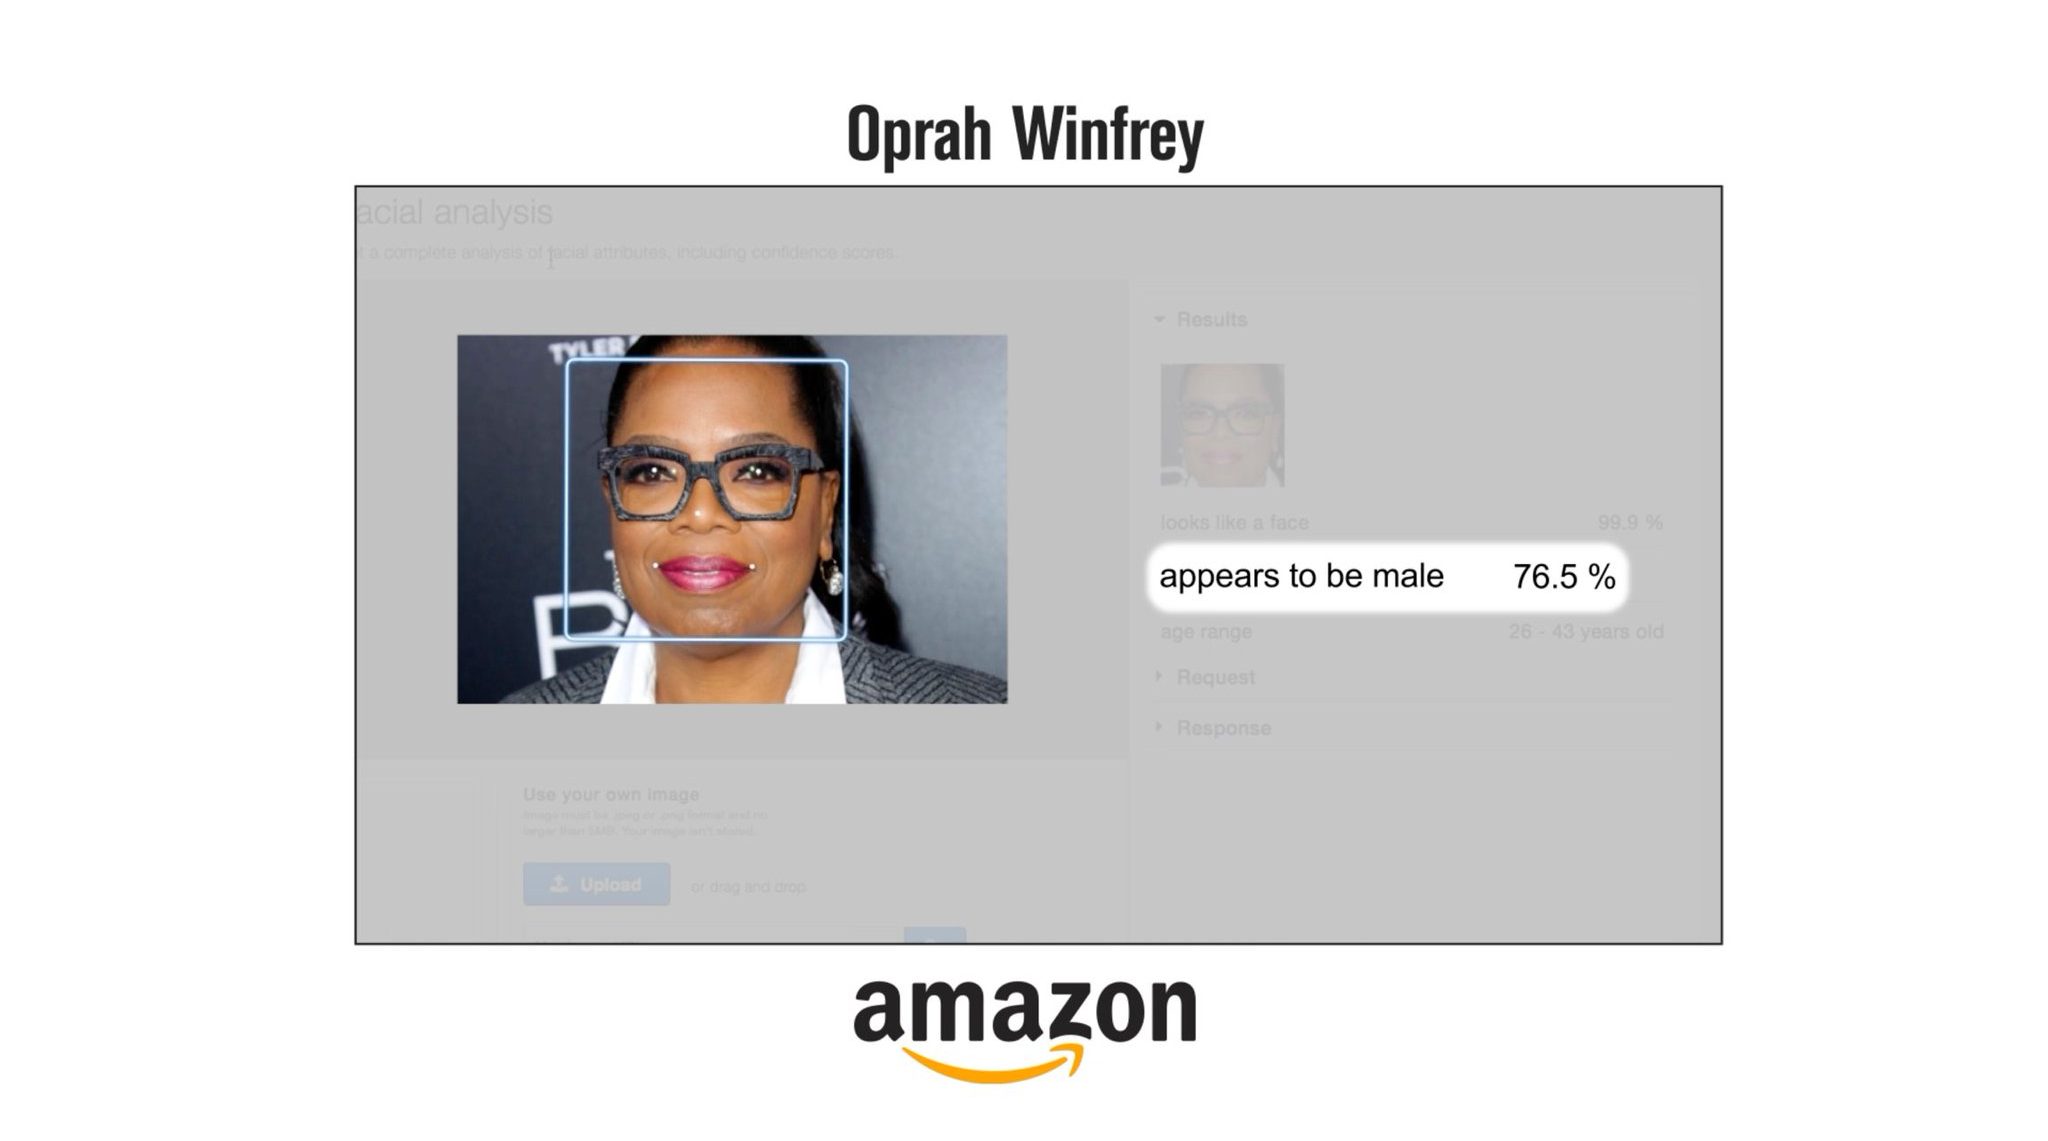 Oprah misclassified by face recognition